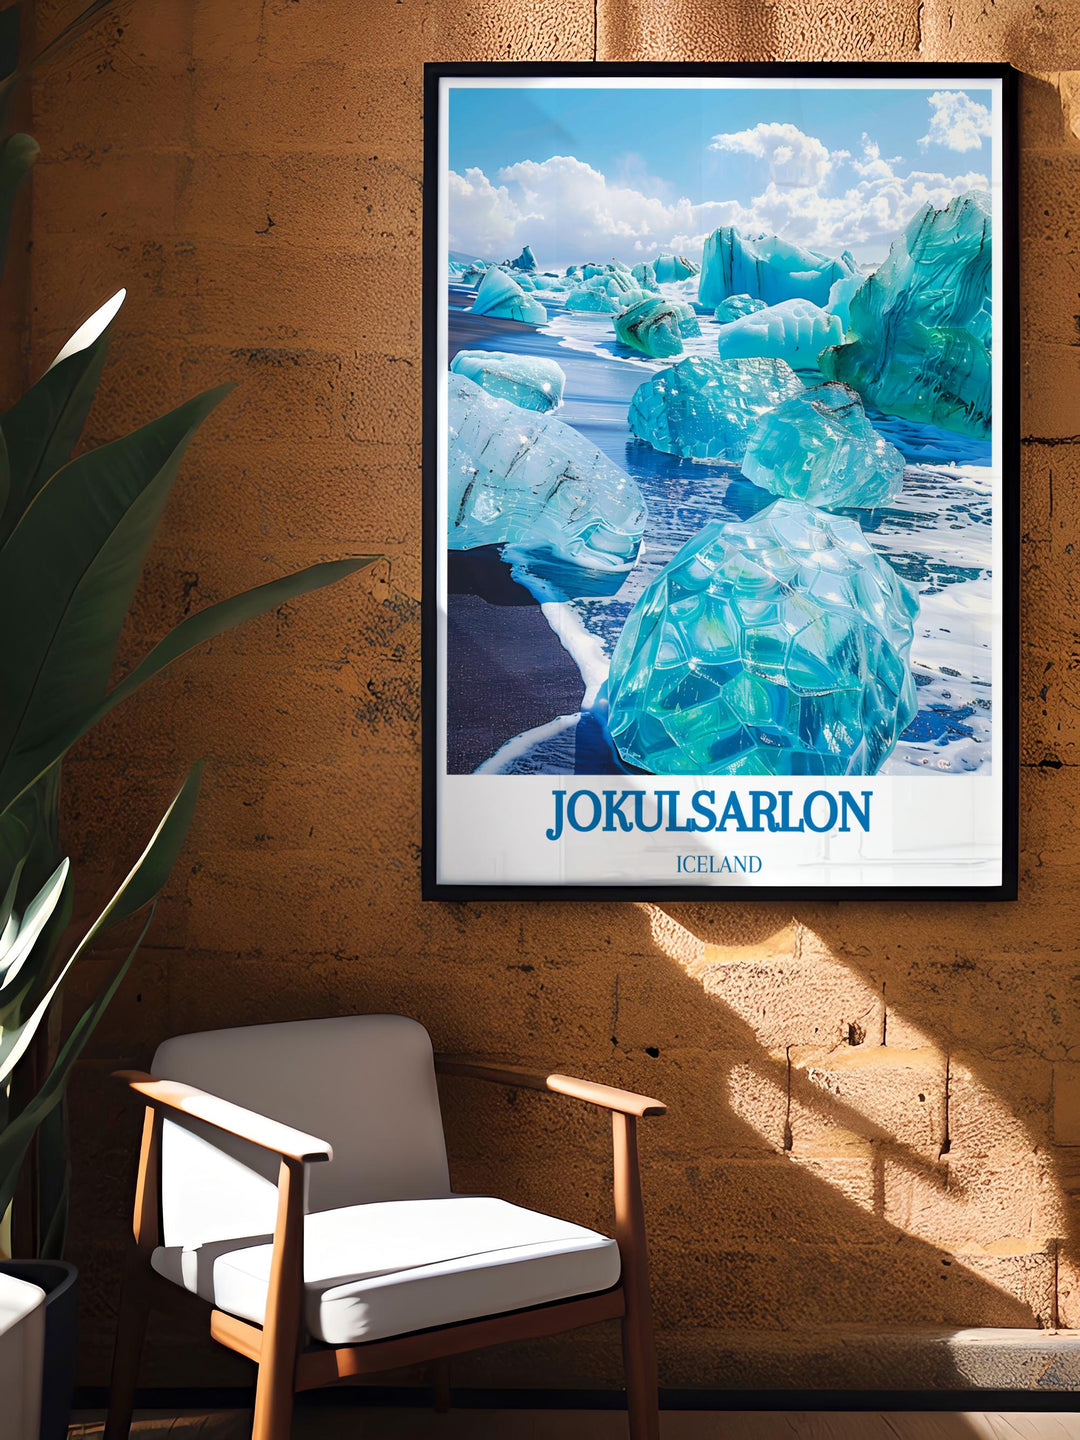 Customizable print of Icelandic landscapes tailored to capture the essence of Jokulsarlon and its surrounding nature